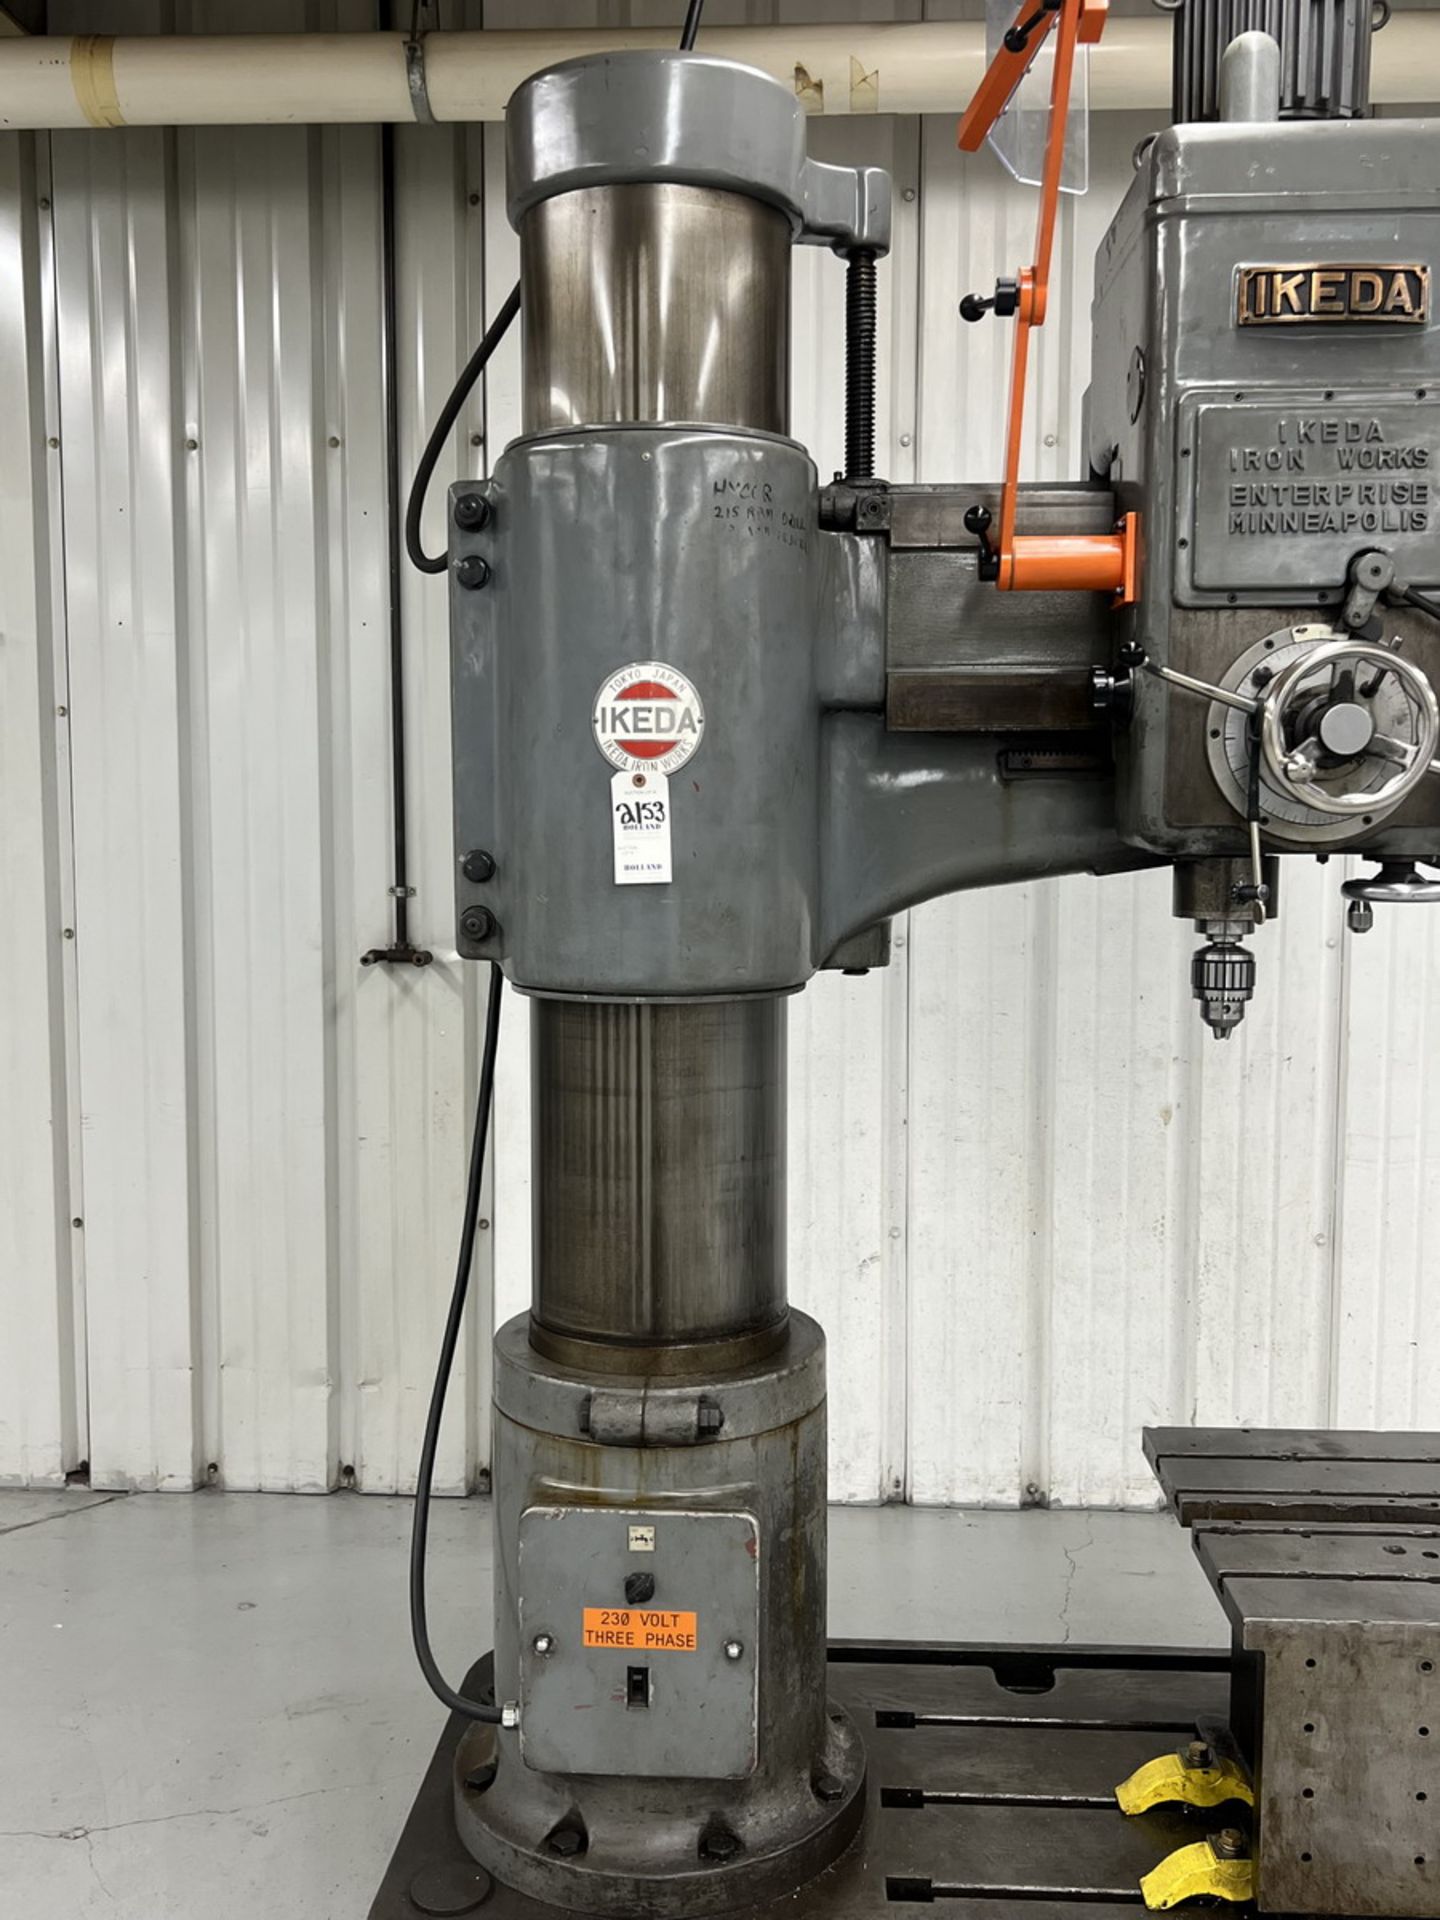 1977 Ikeda Iron Works Type RM1300 Radial Arm Drill - Image 4 of 12